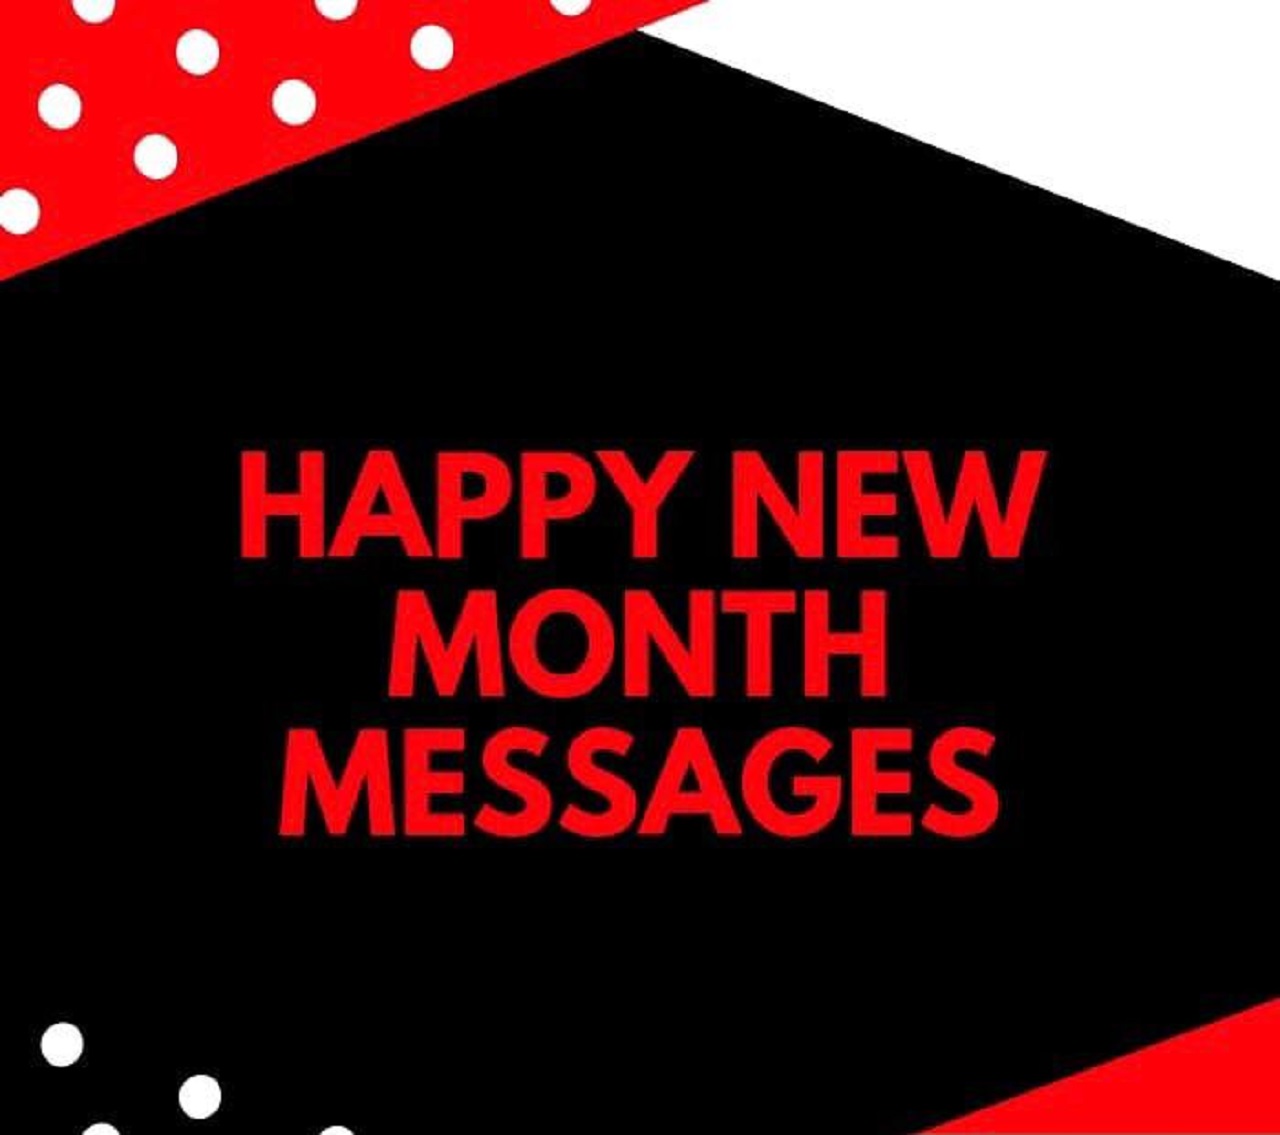 50 Happy New Month Prayers, Messages, And Wishes For December 2021